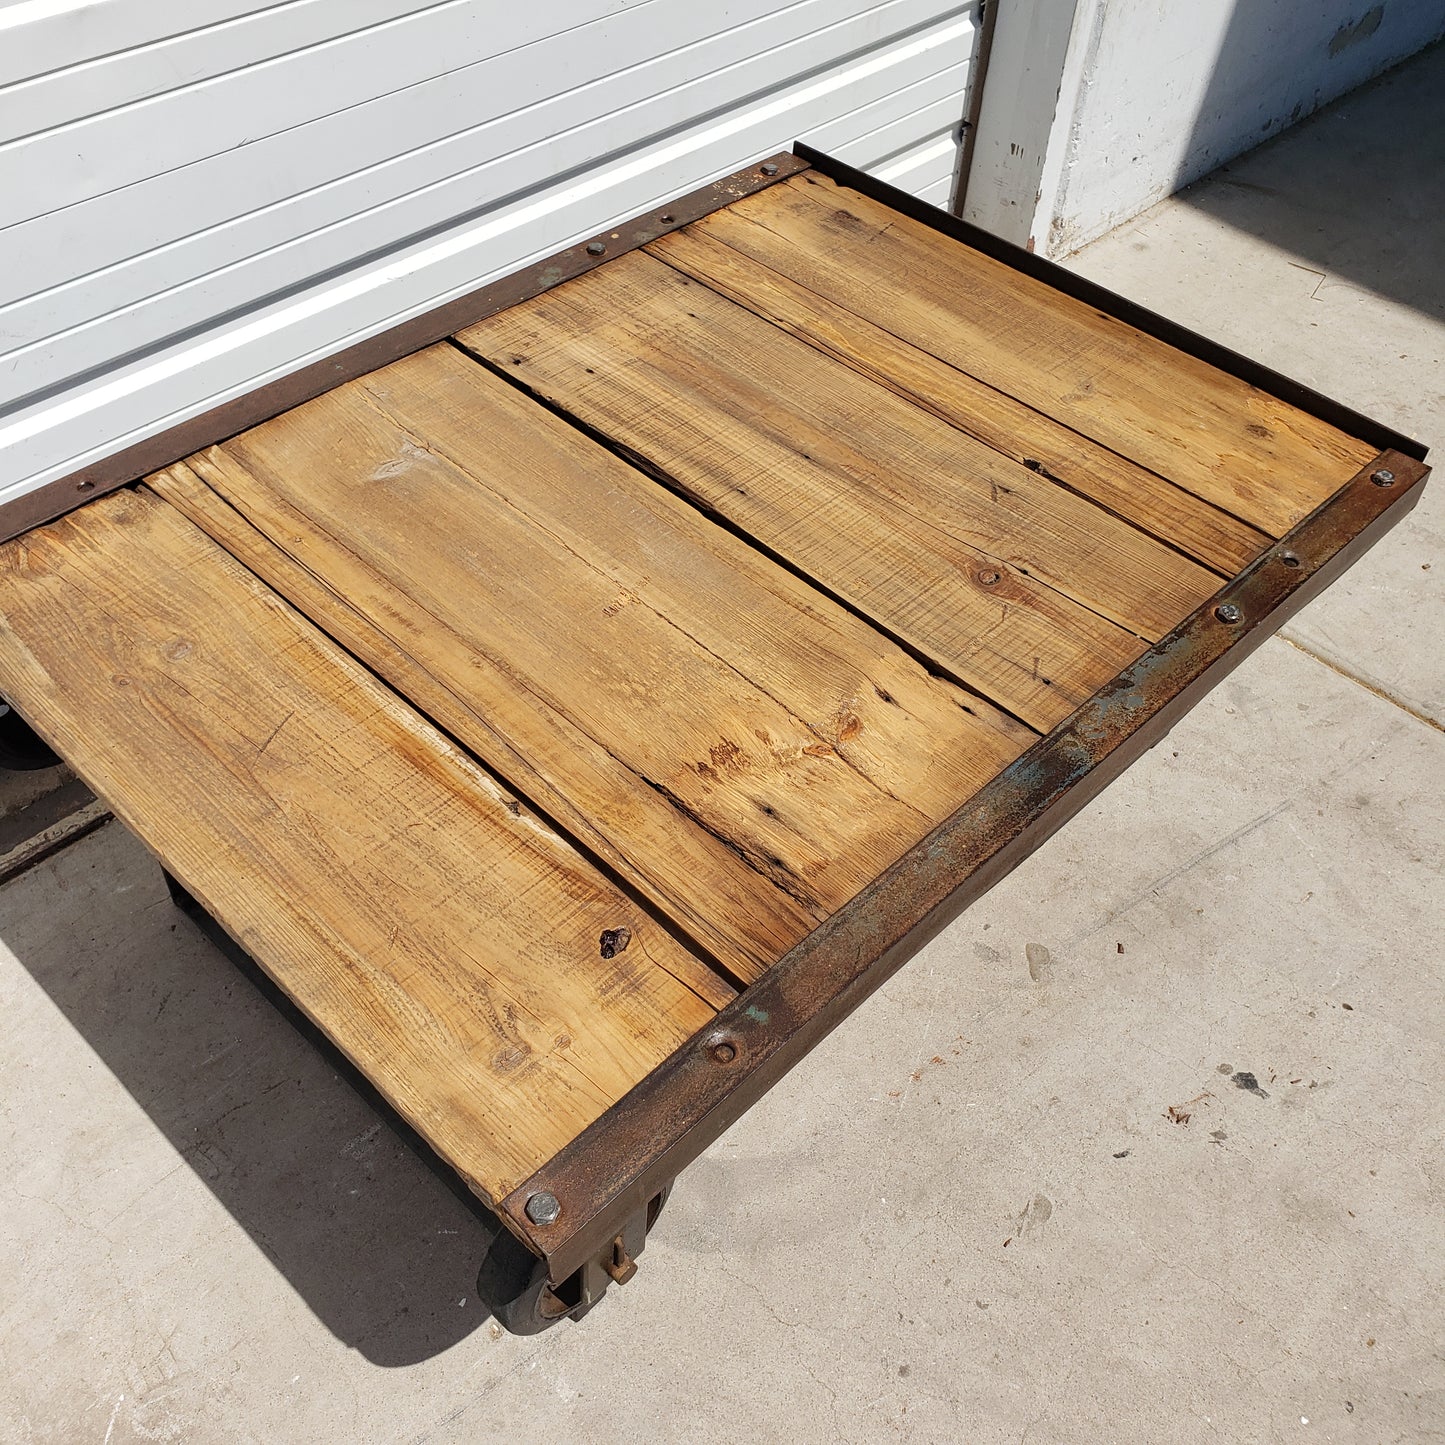 Repurposed Factory Coffee Table Trolley with Barn Wood Top